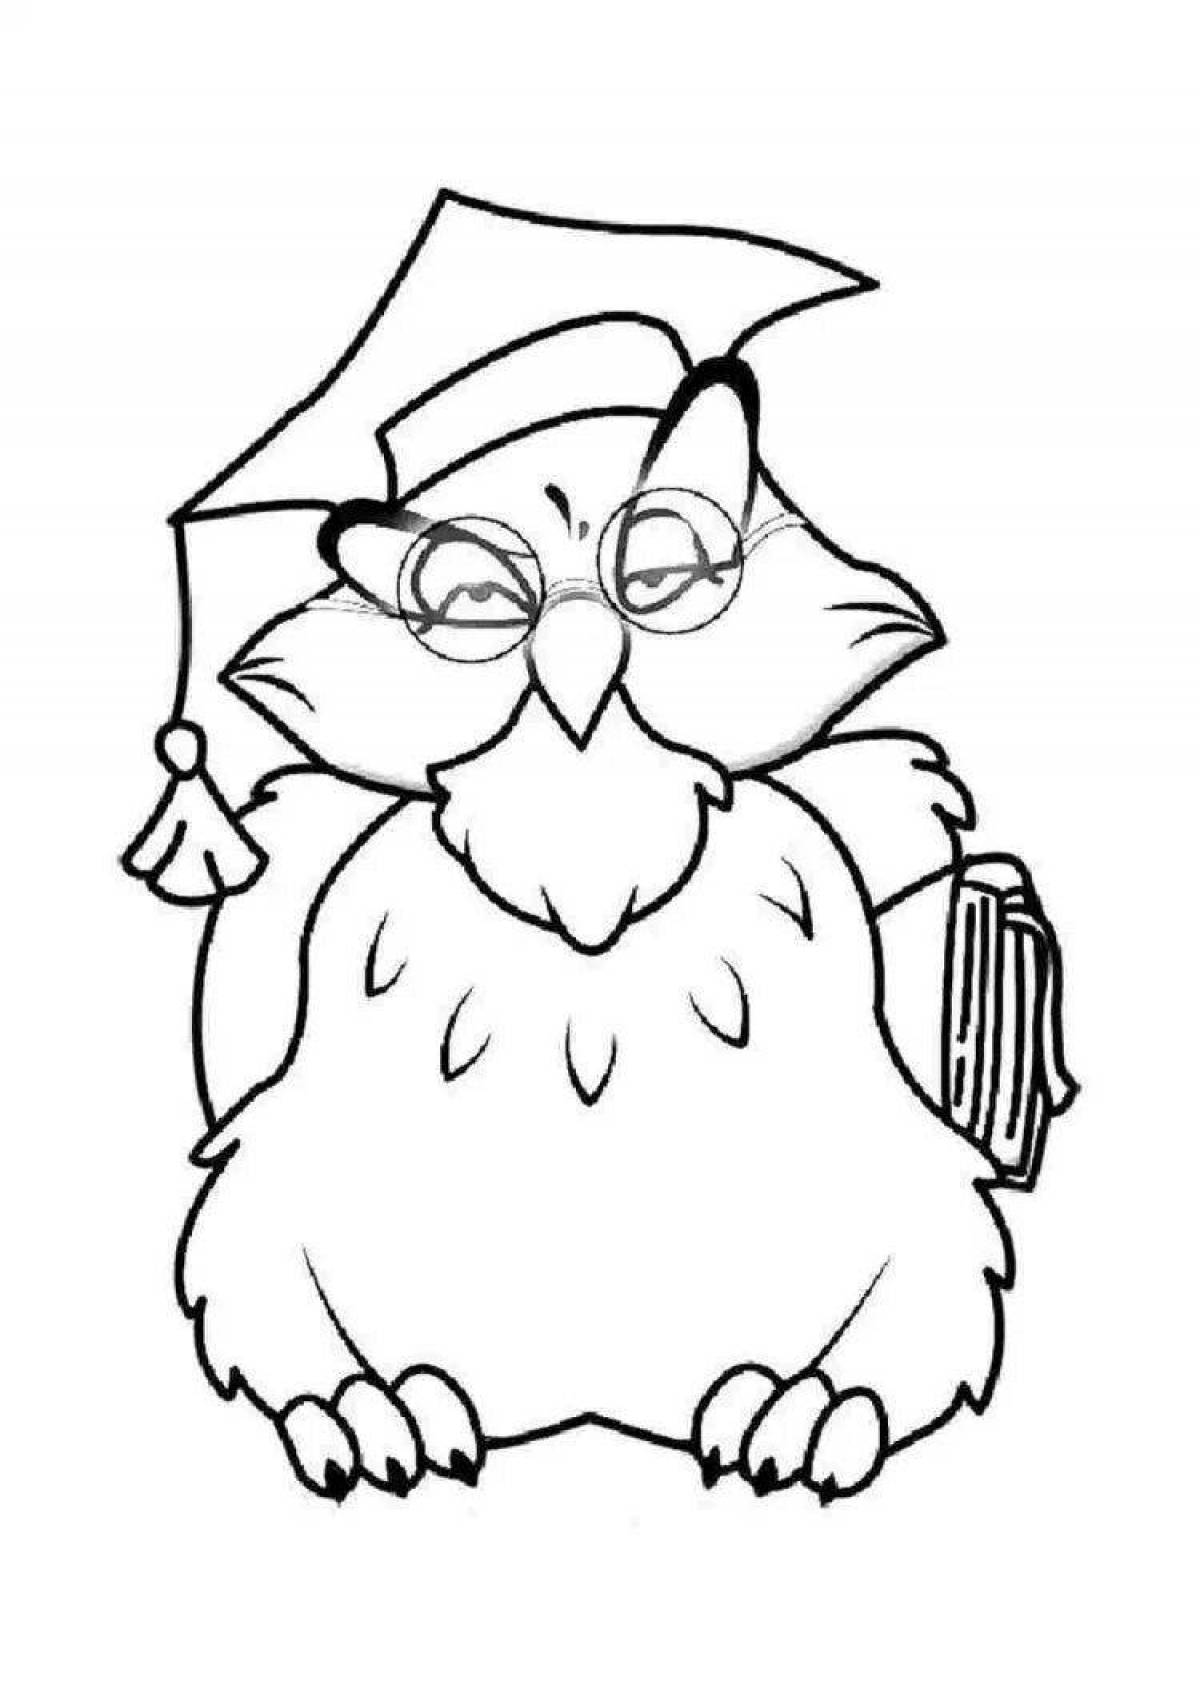 Playful wise owl coloring page for kids